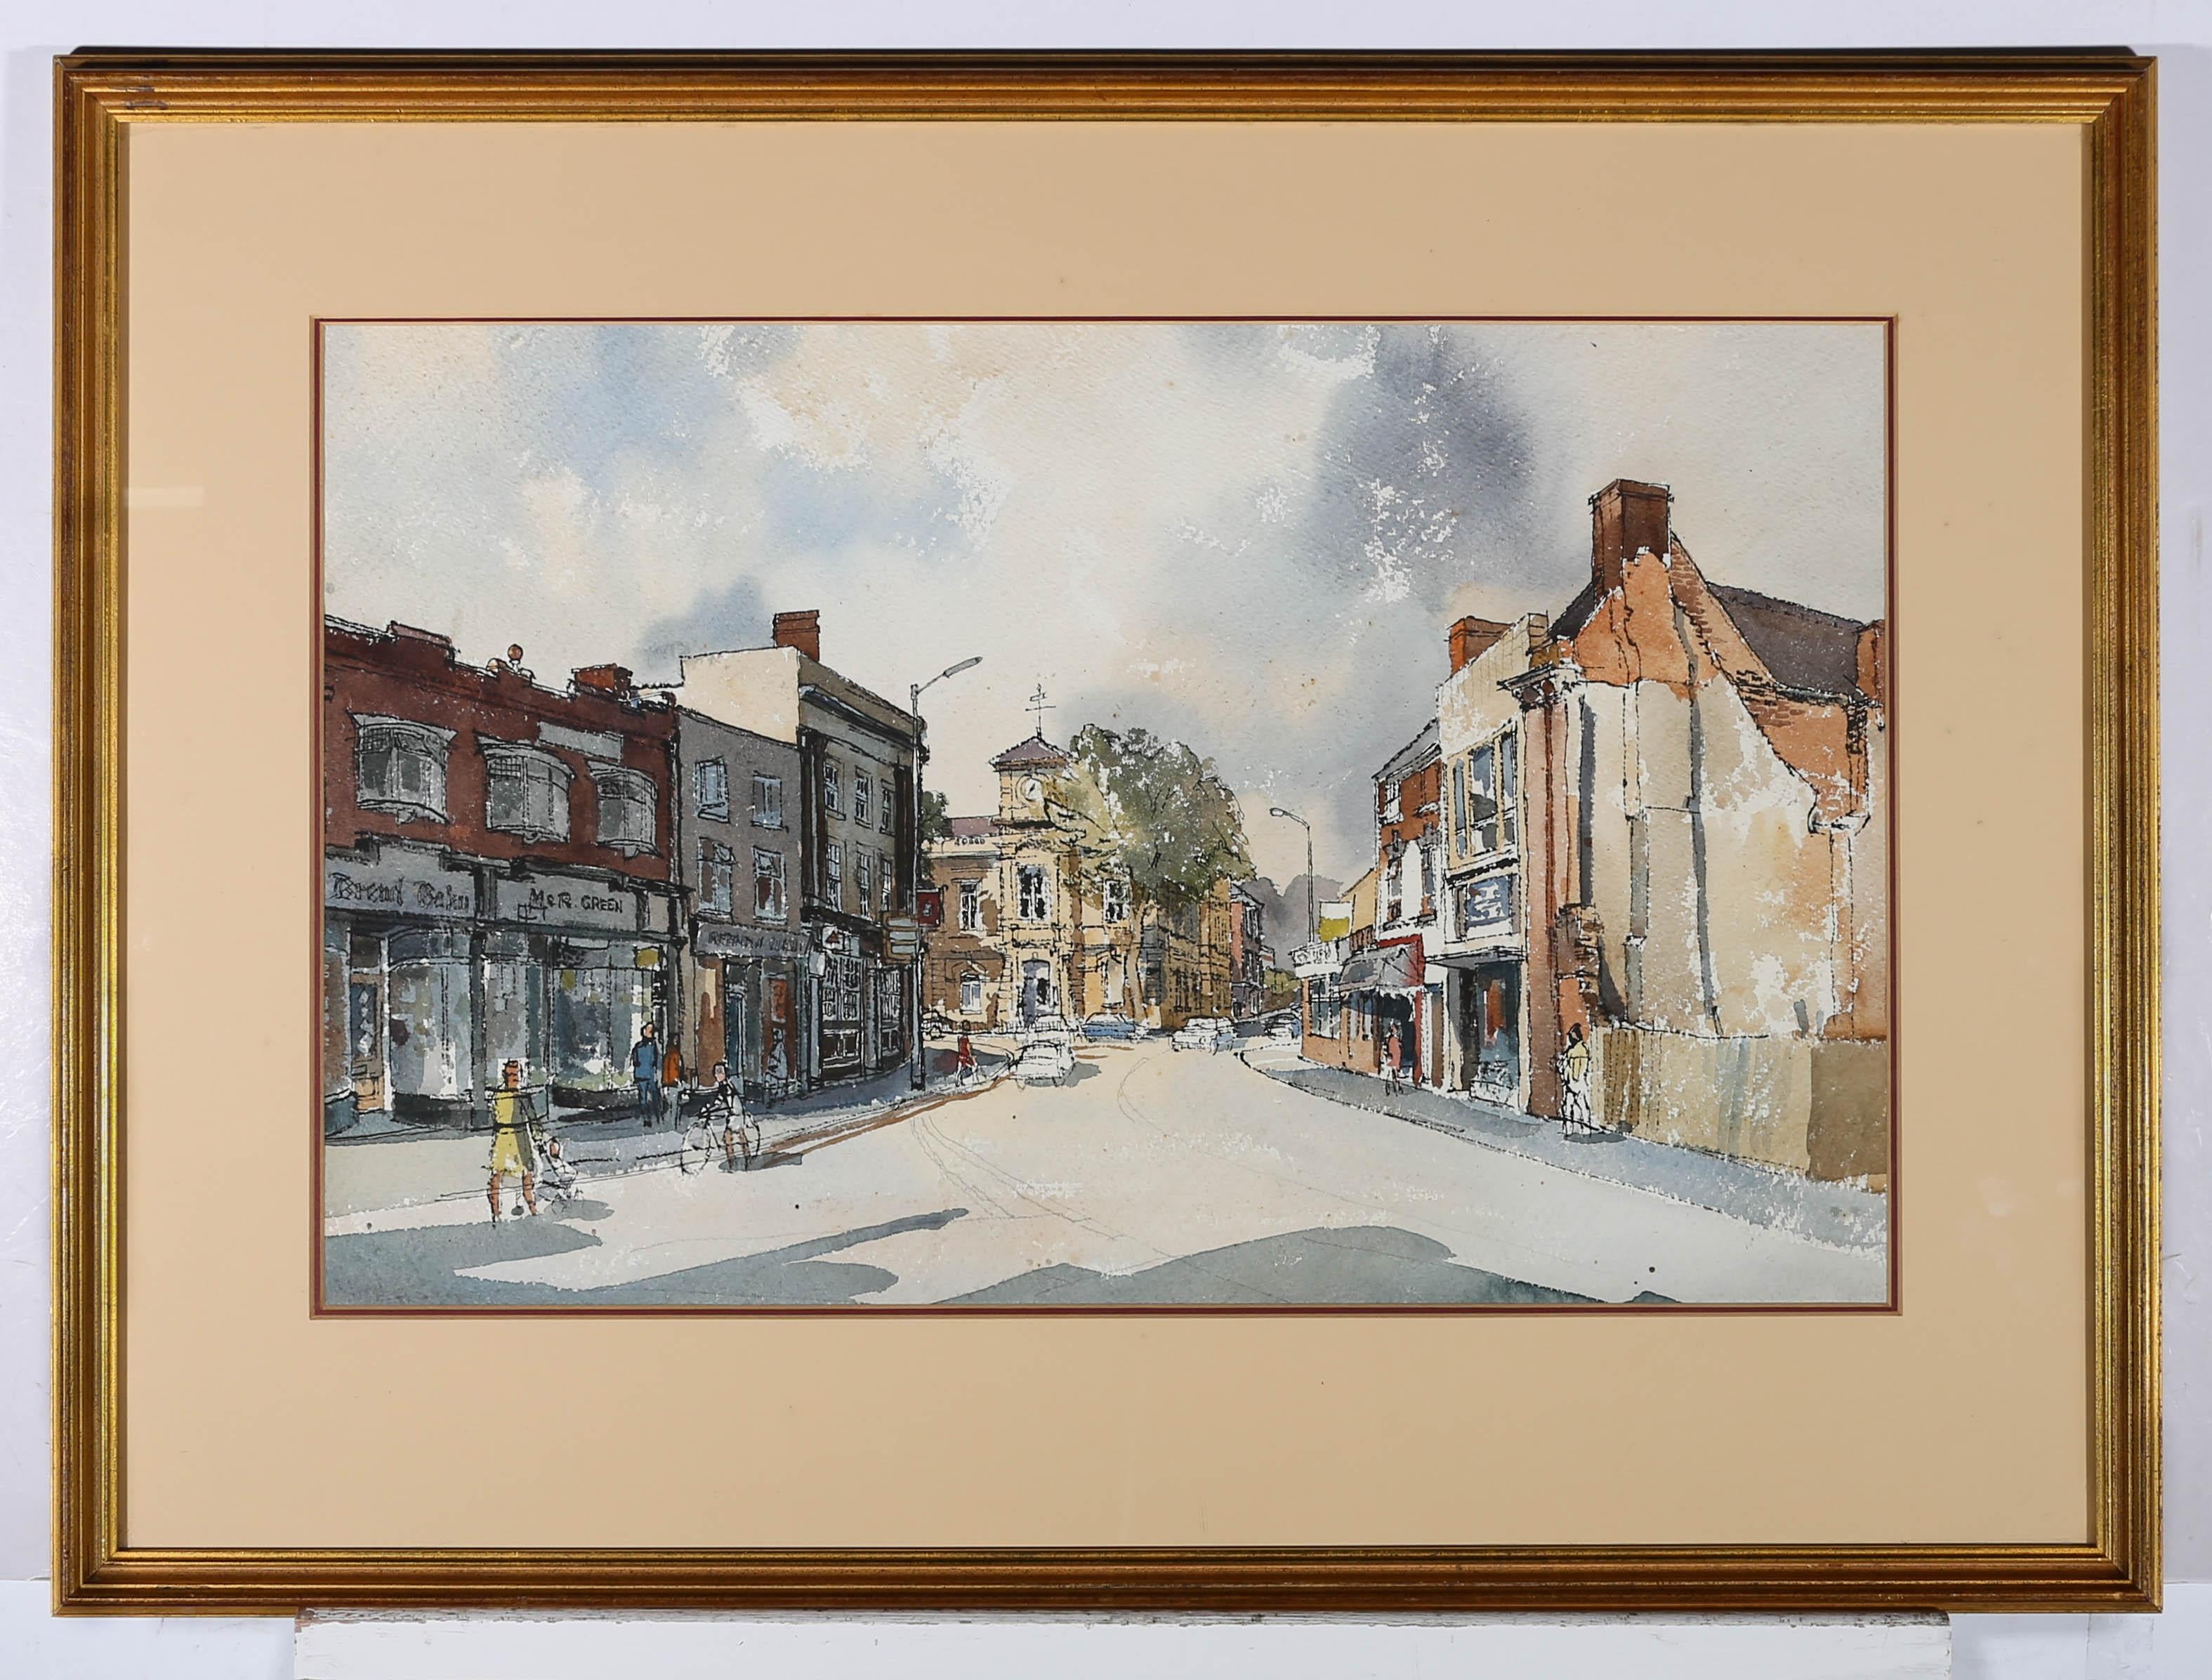 A charming street scene depicting figures window shopping in a town centre. Unsigned. presented in a glazed-effect gilt frame. Part of pair of street scenes by the same artist. On watercolour paper.